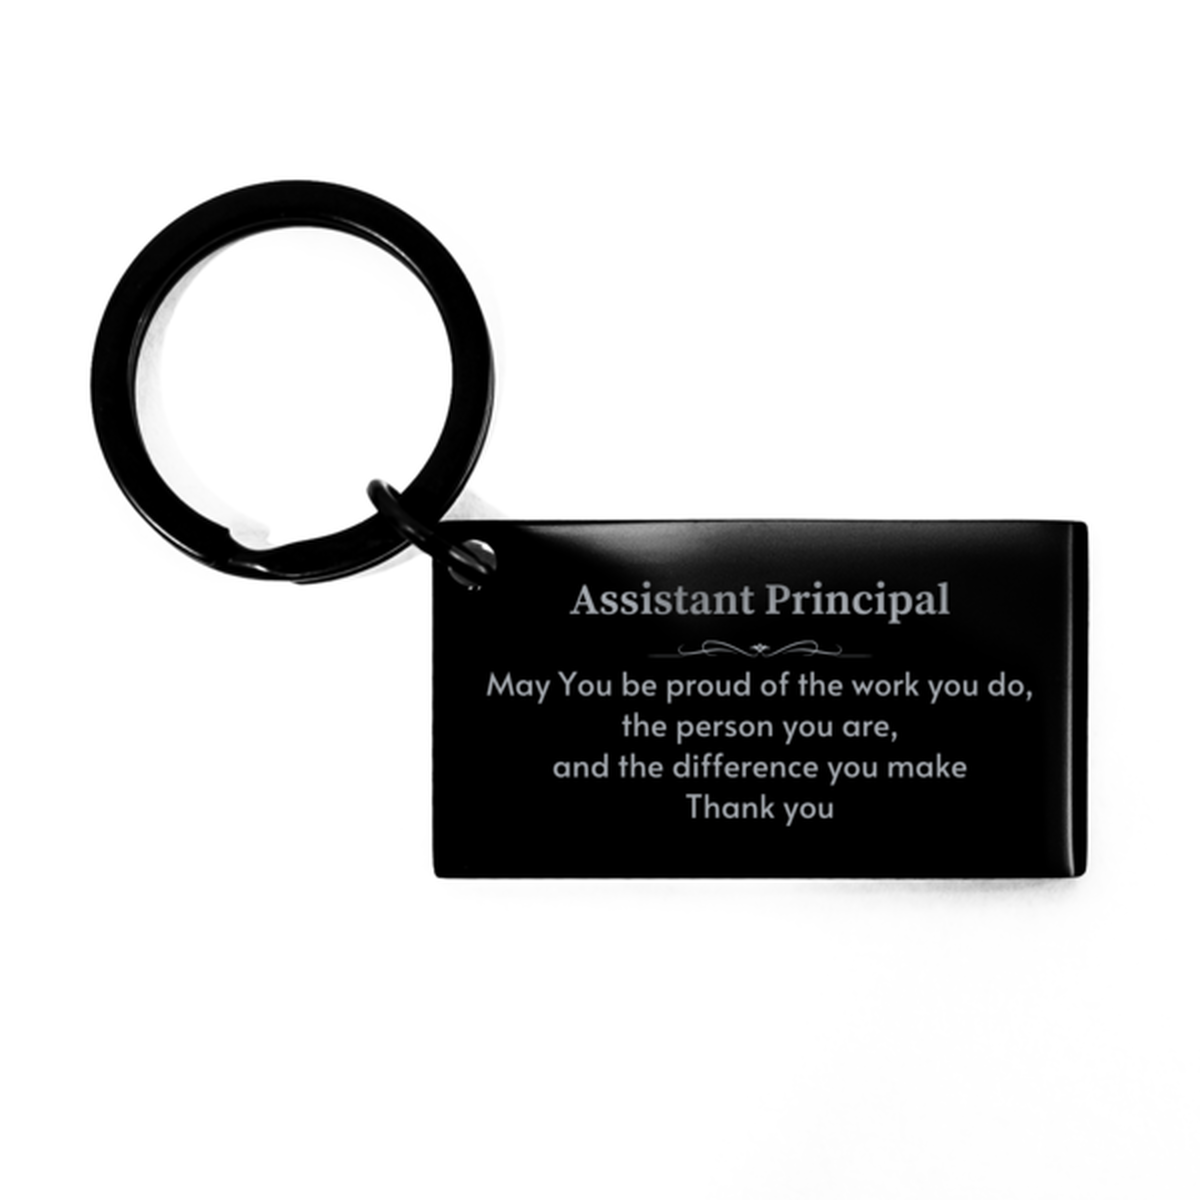 Heartwarming Keychain Retirement Coworkers Gifts for Assistant Principal, Concierge May You be proud of the work you do, the person you are Gifts for Boss Men Women Friends